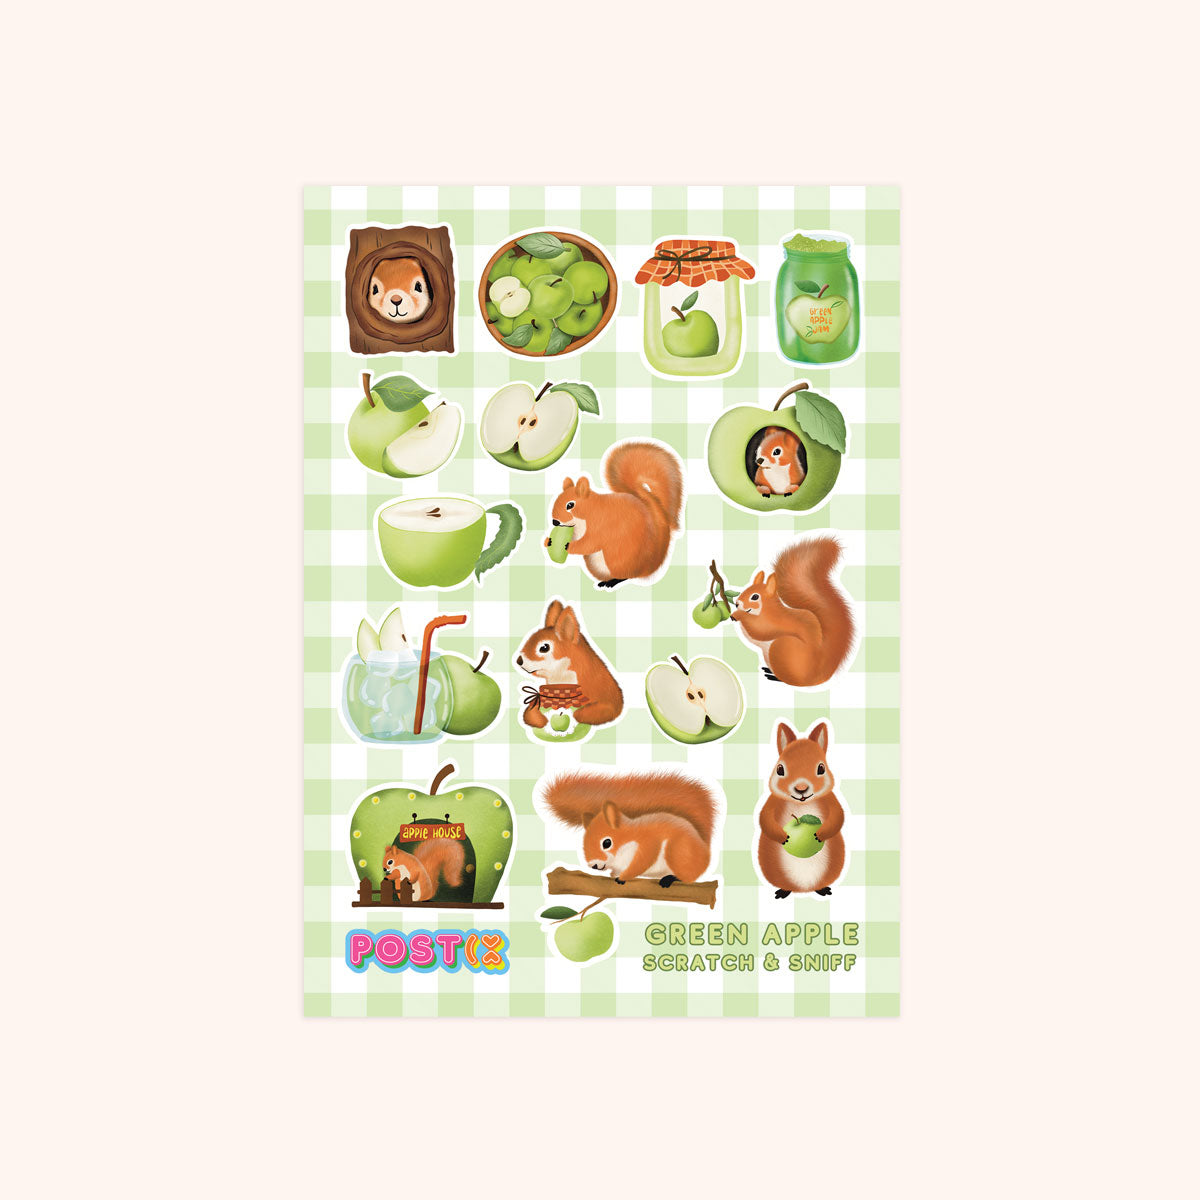 Green Apple Squirrel Snacks A6 Scratch and Sniff Sticker Sheet